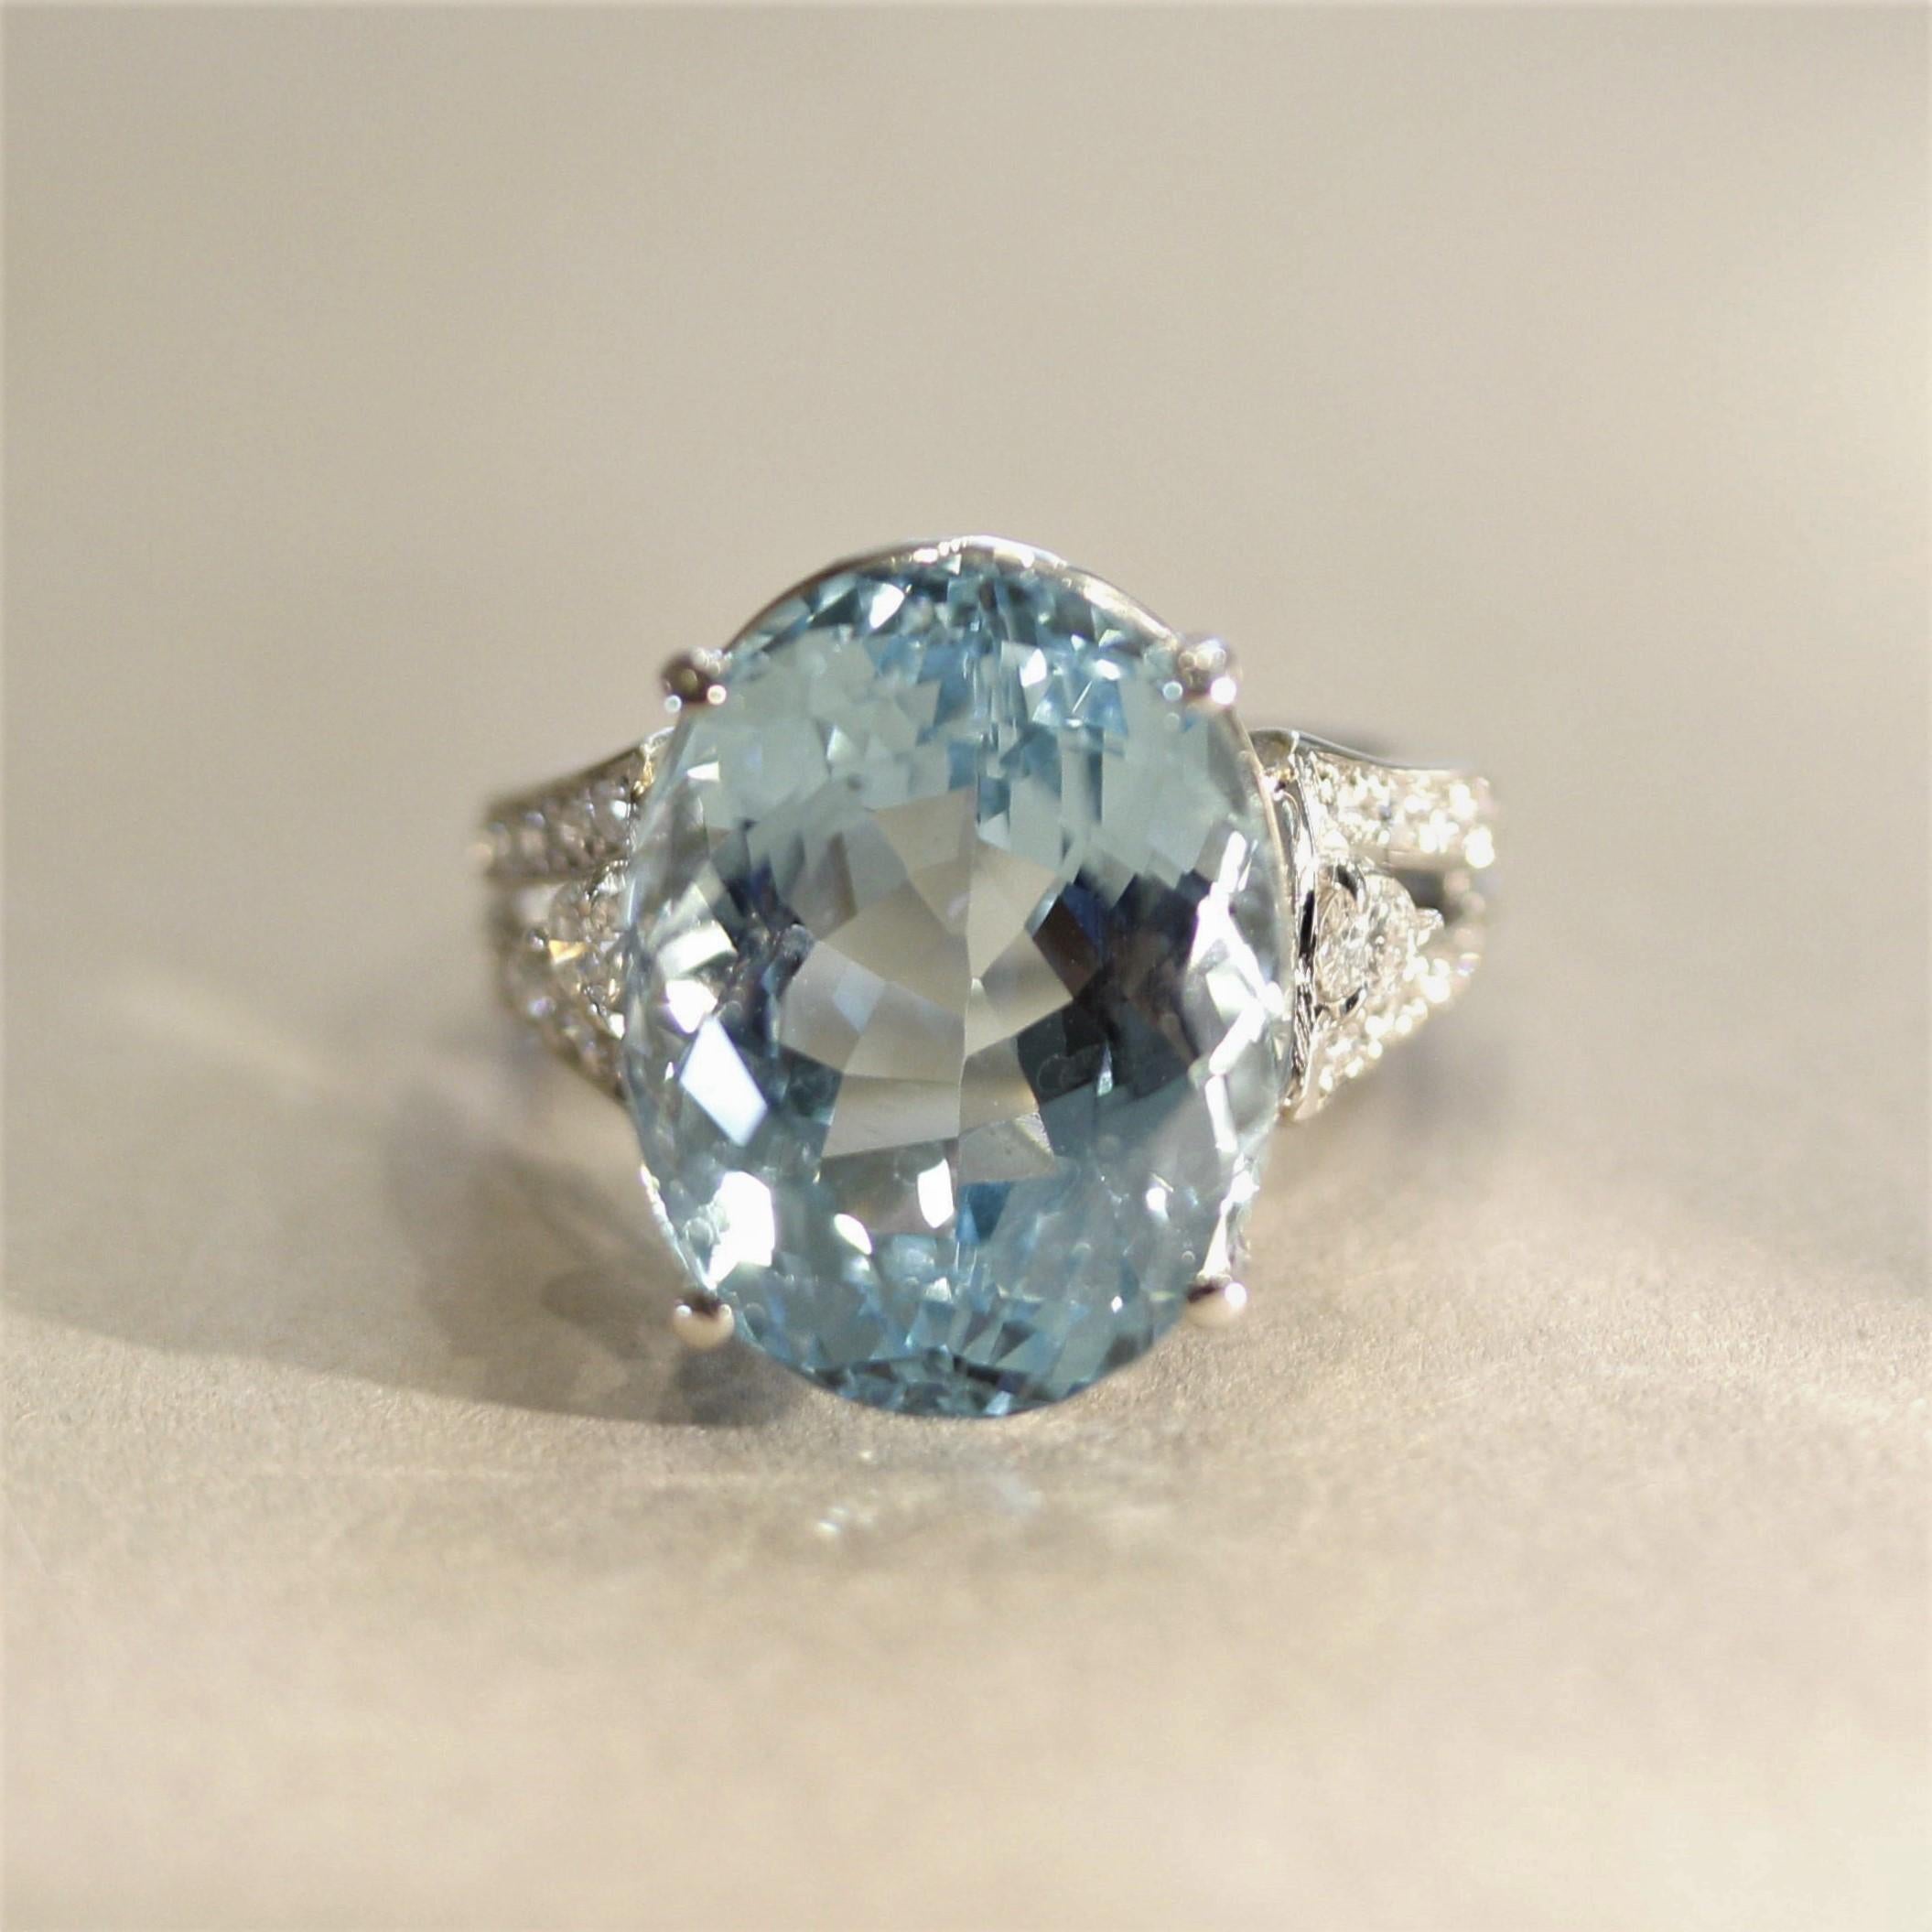 A special ring hand-fabricated in platinum, featuring a 13.73 carat oval-shape aquamarine! It has a lovely sea-blue color with excellent brilliance and light return. It is accented by 0.32 carats of round brilliant-cut diamonds which add light and